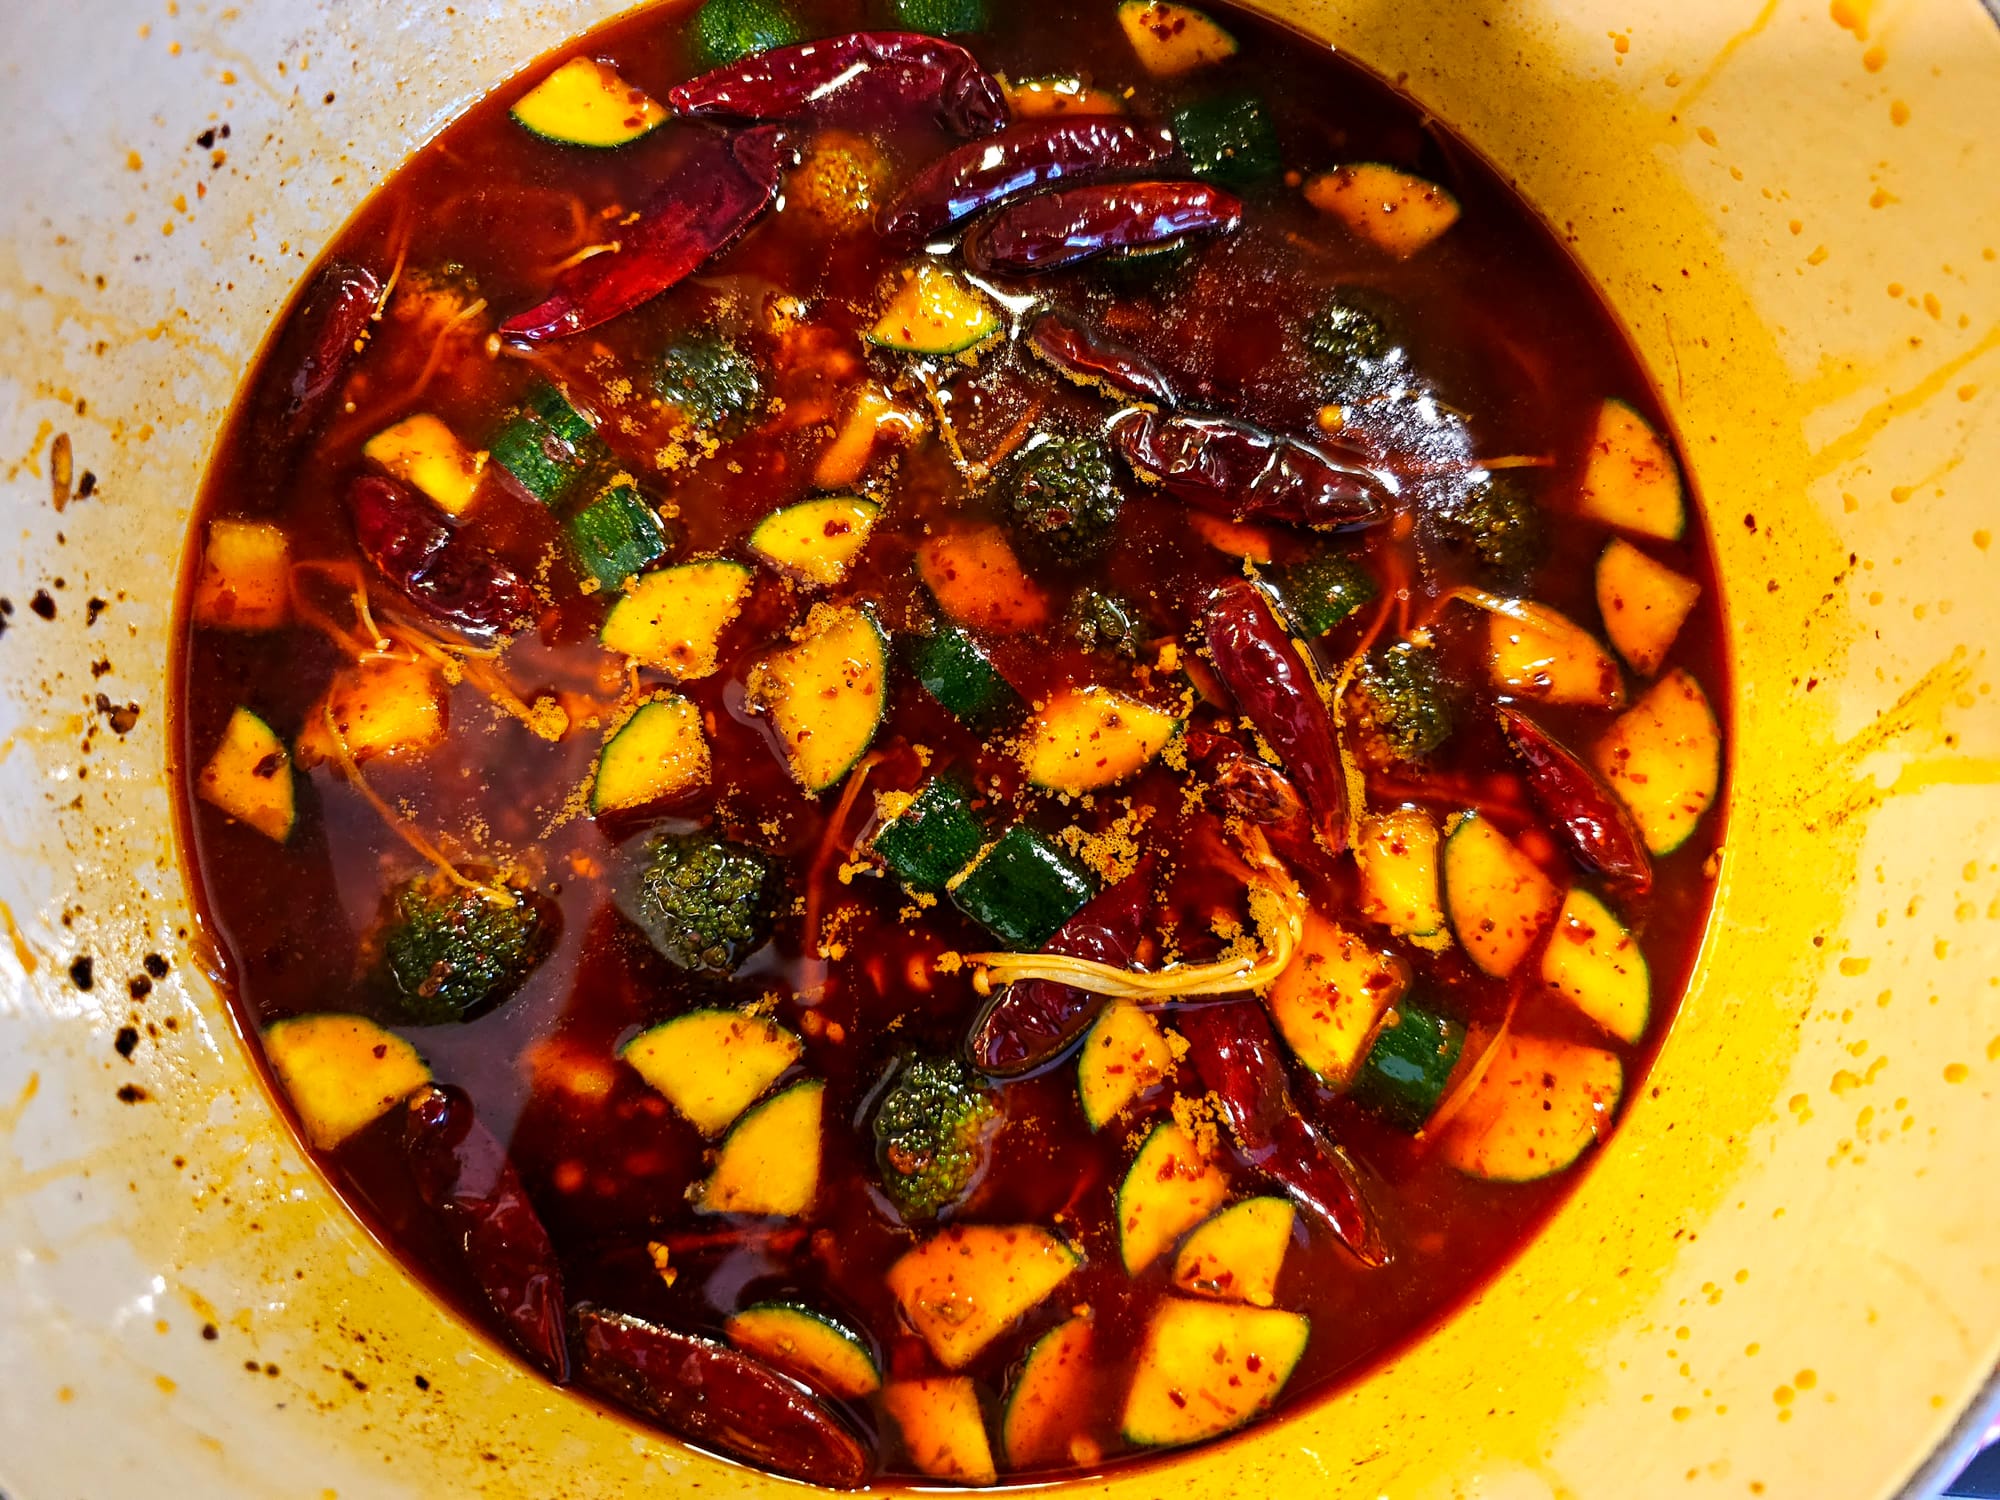 Aerial view of a hot-pot, with dark red liquid, all sorts of vegetables and chilis